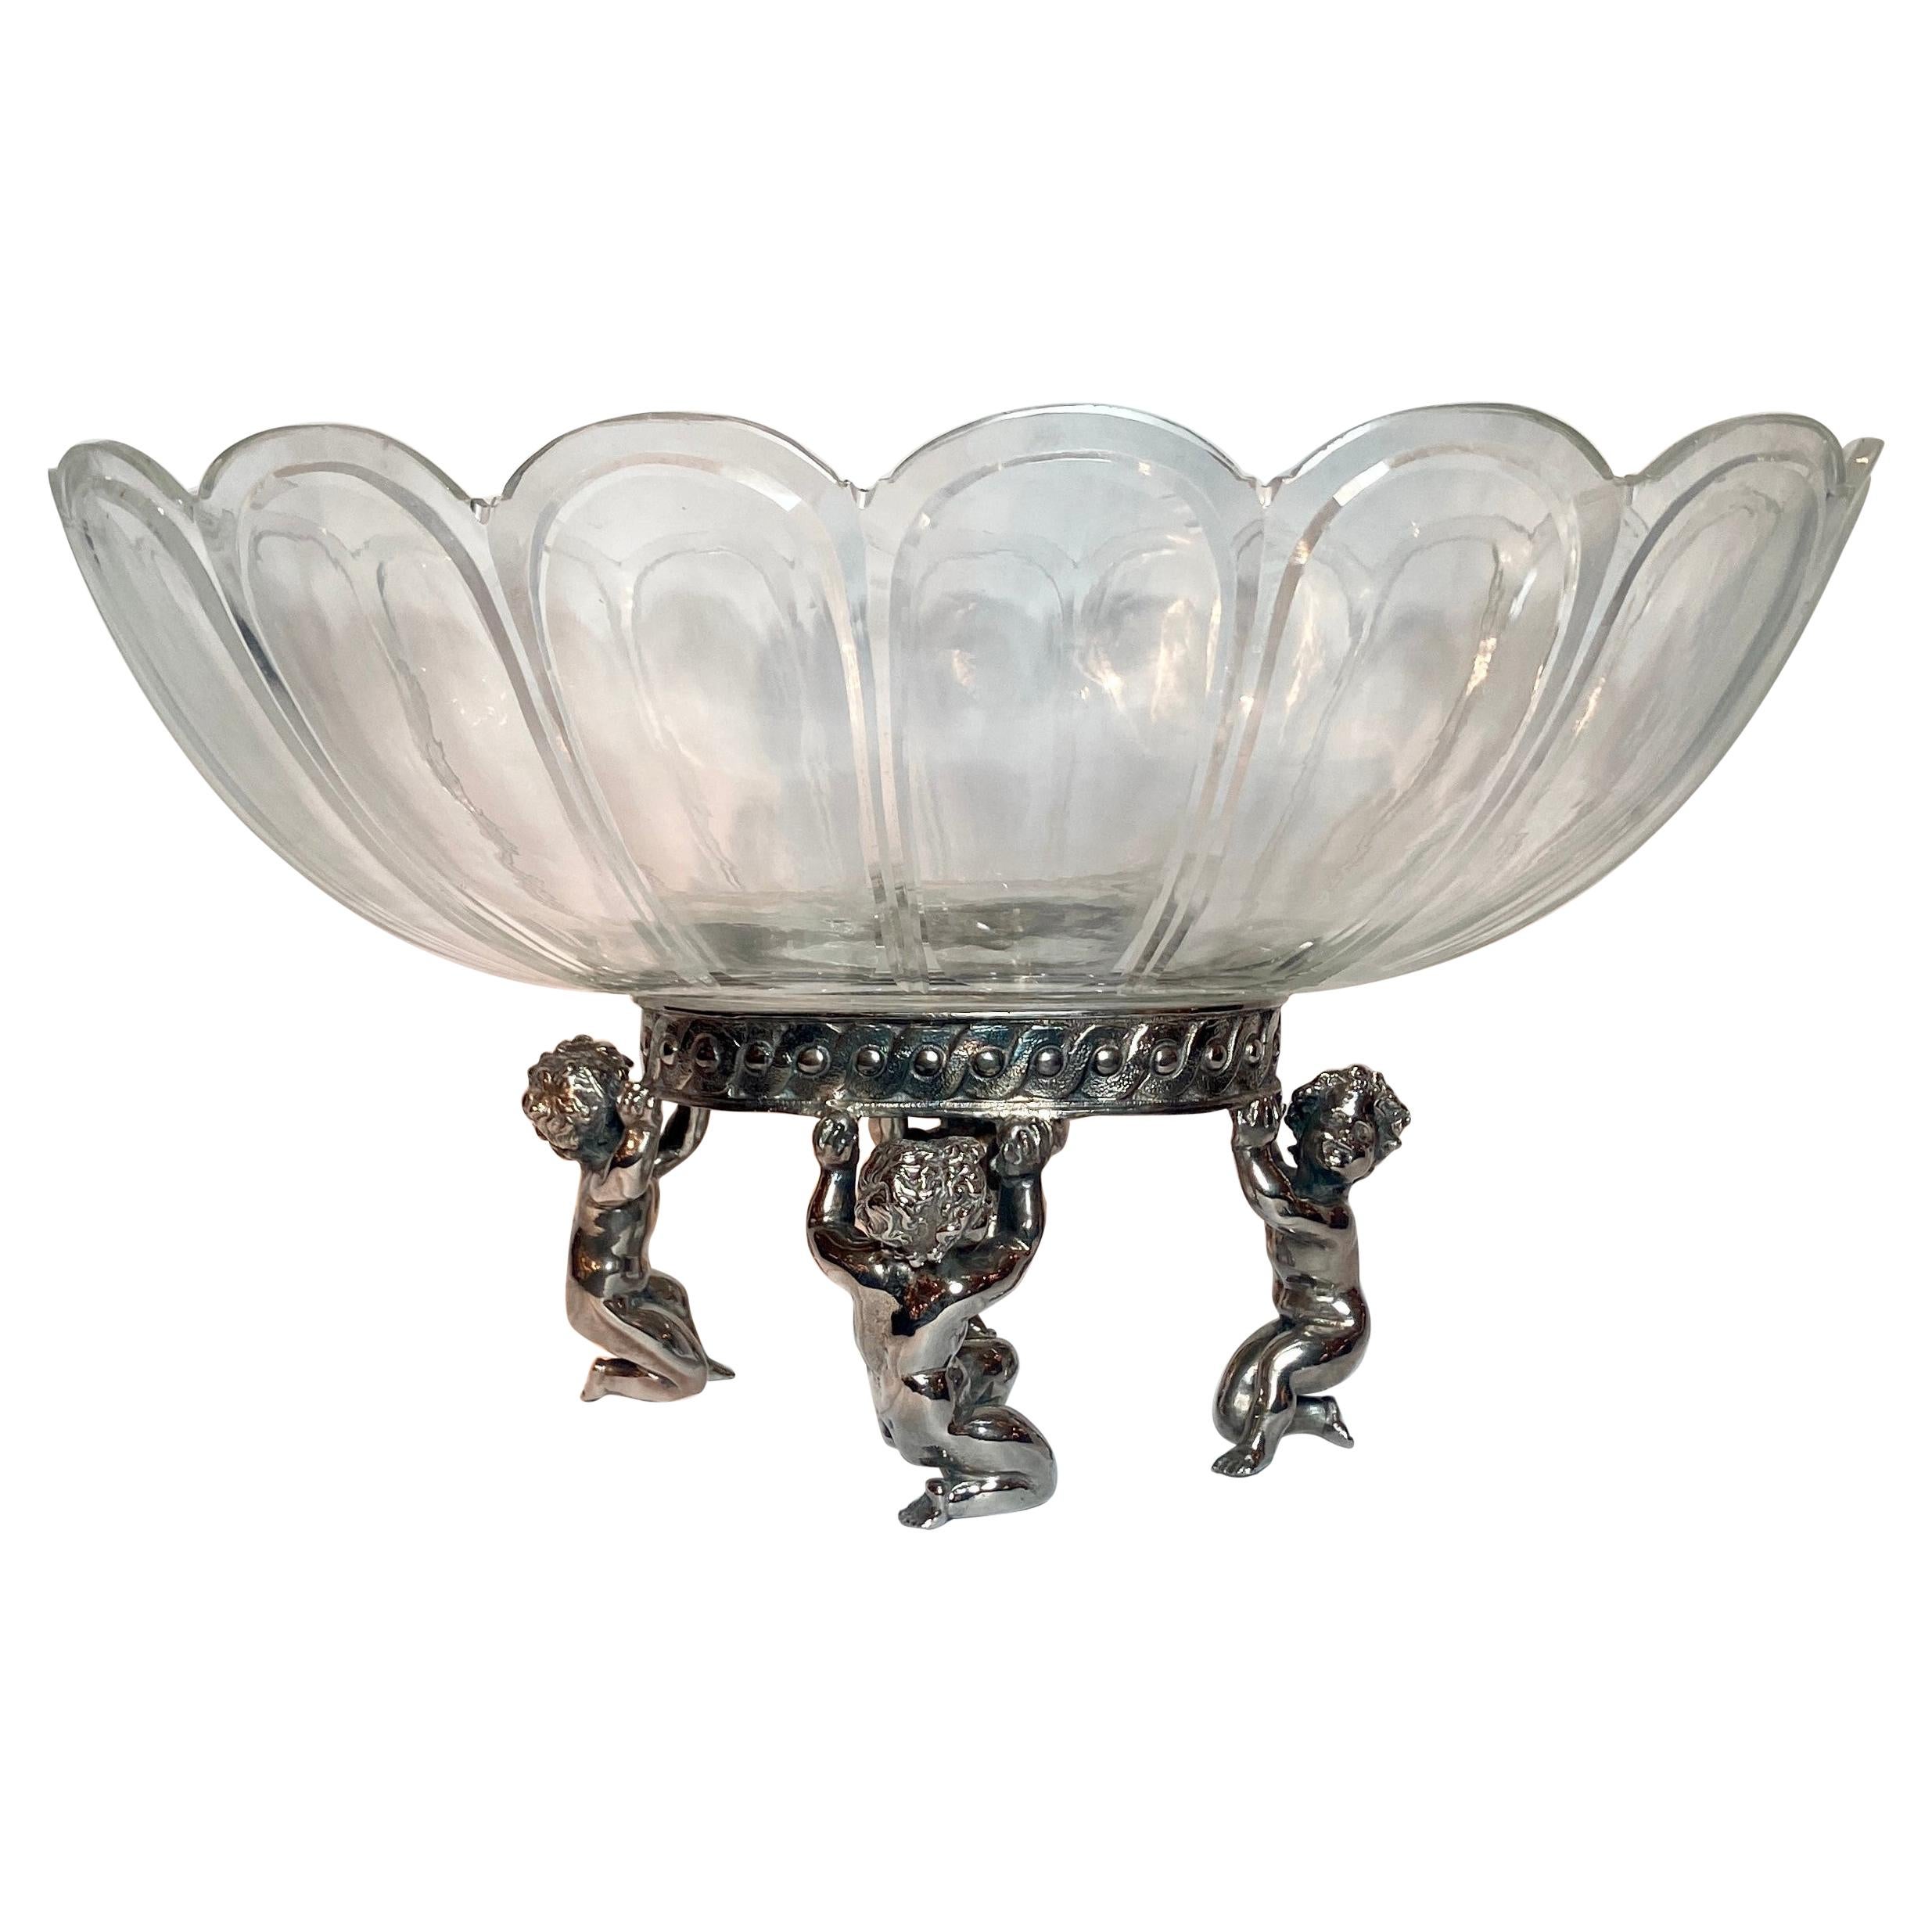 Antique French Christofle Silver on Bronze Baccarat Bowl Centerpiece, 1880s For Sale